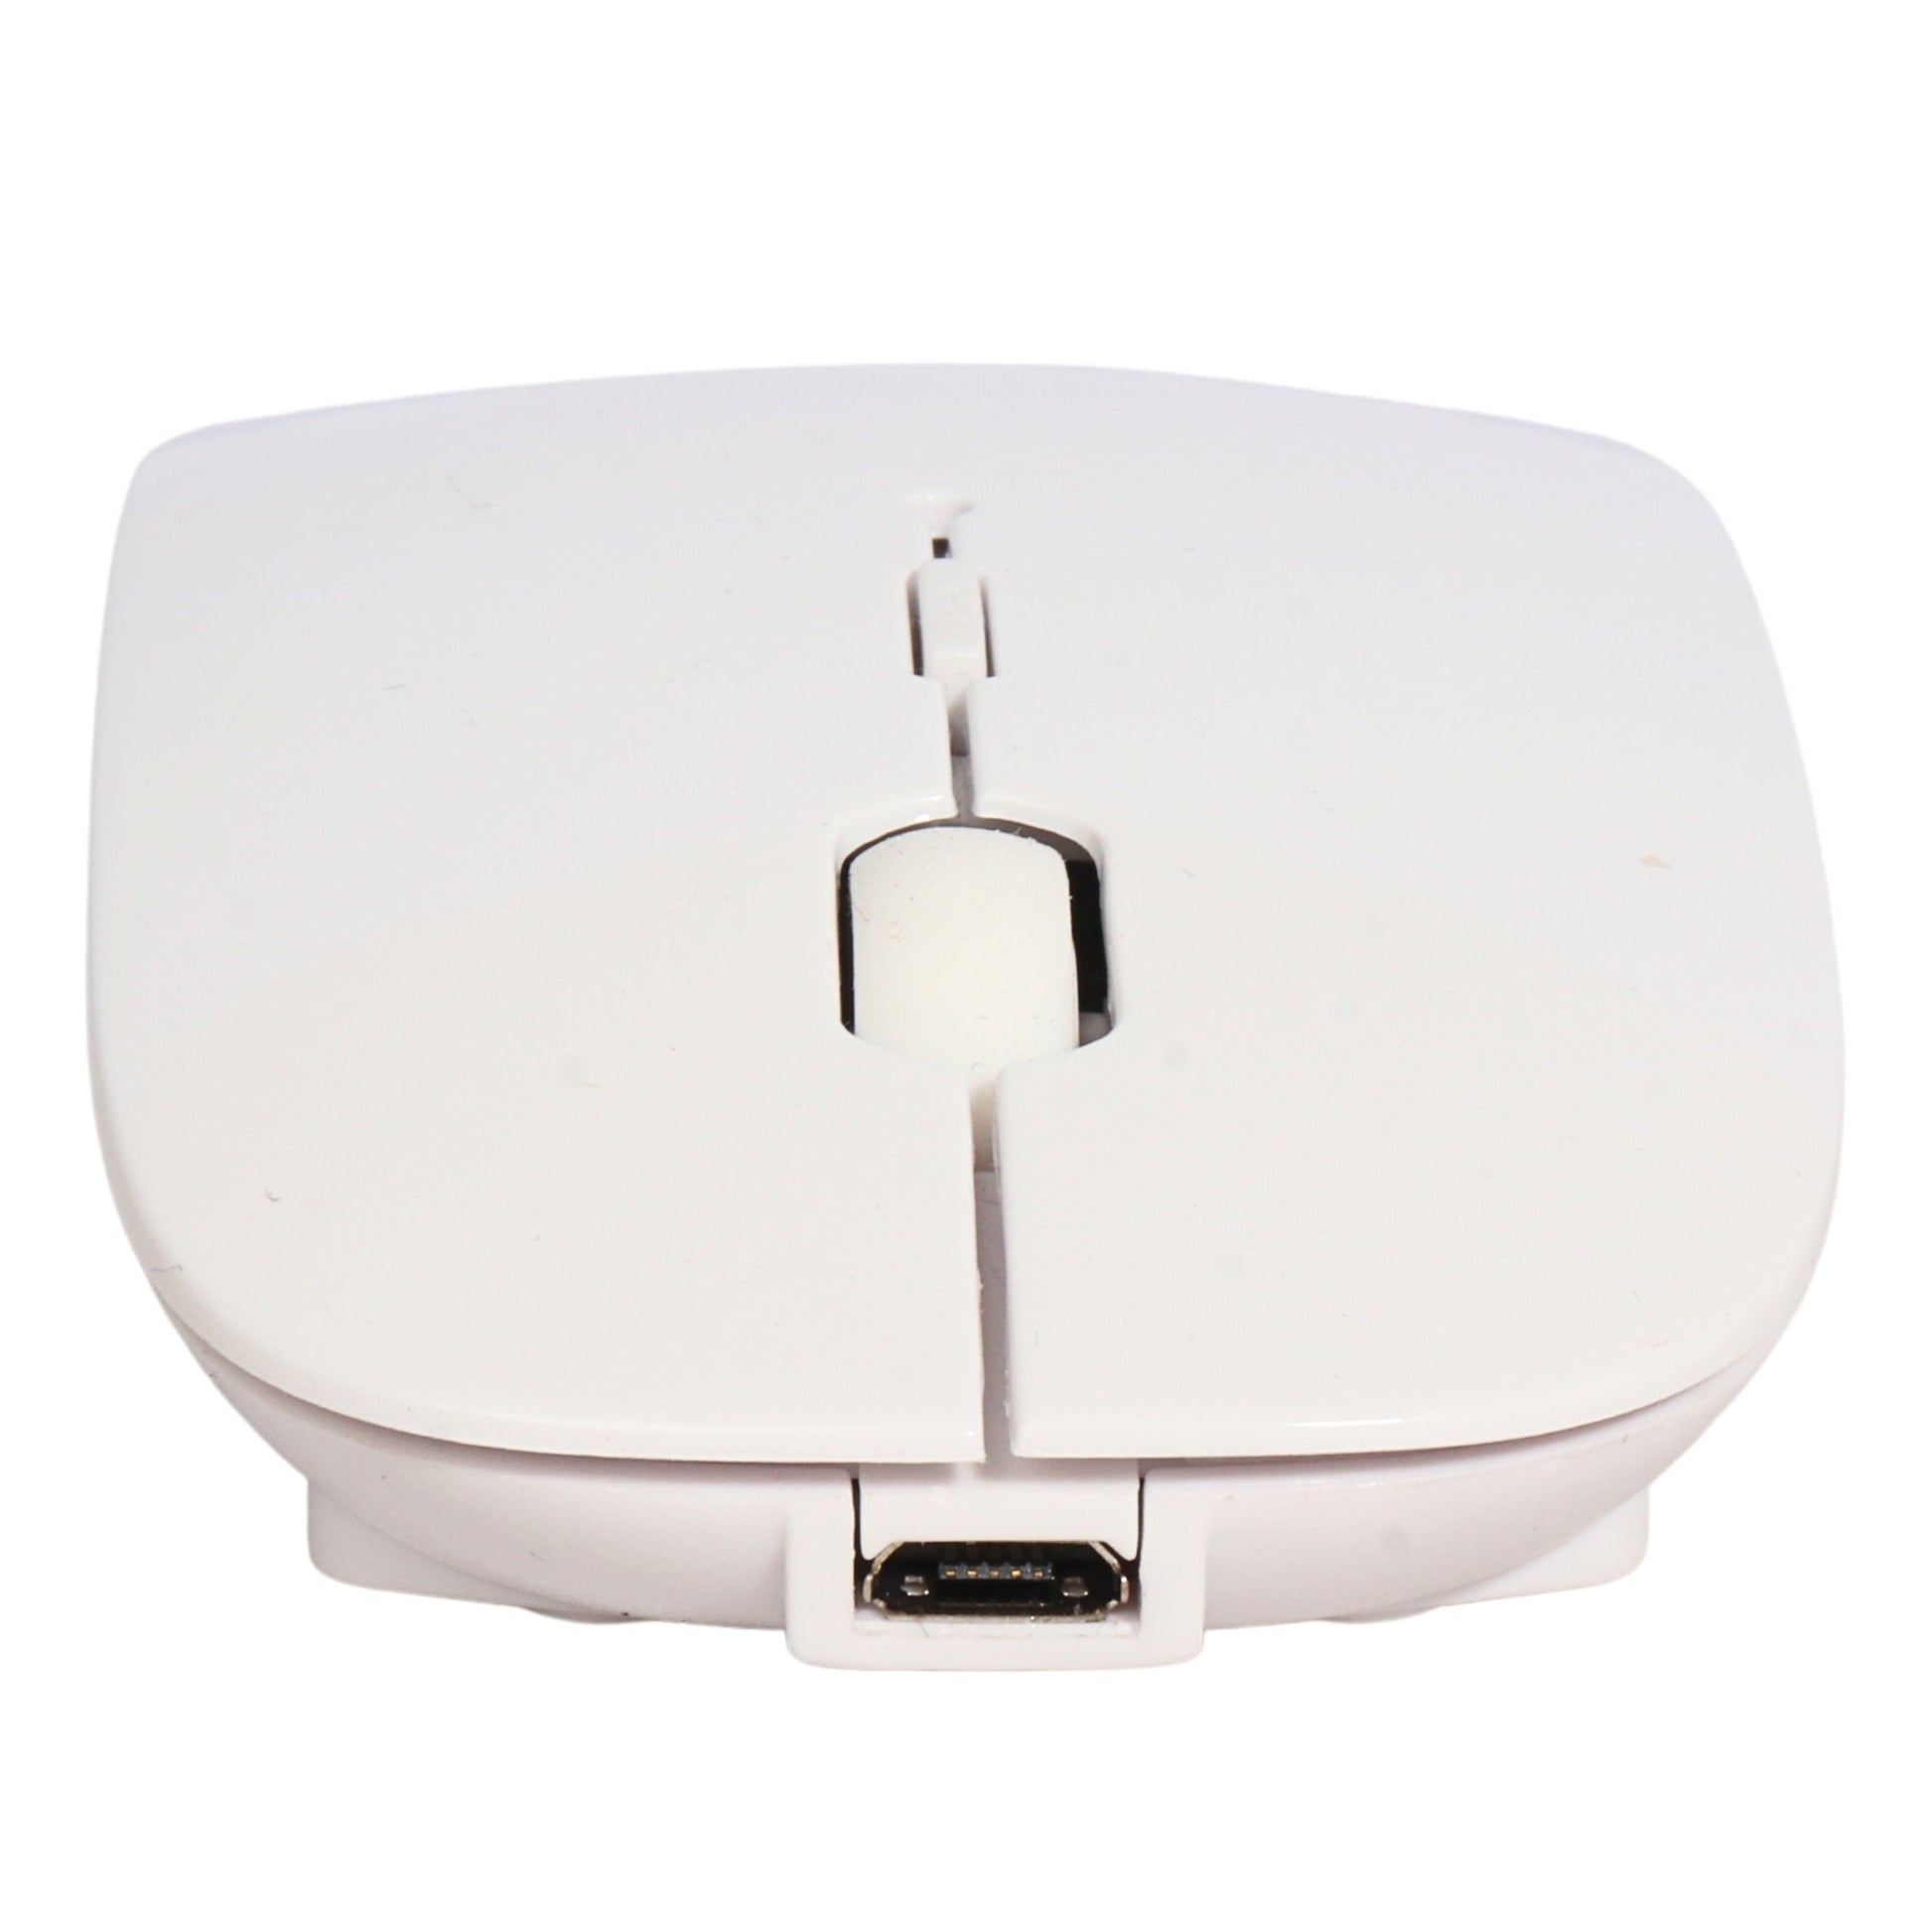 BRANDS & BEYOND Laptops & Accessories Wirless Mouse